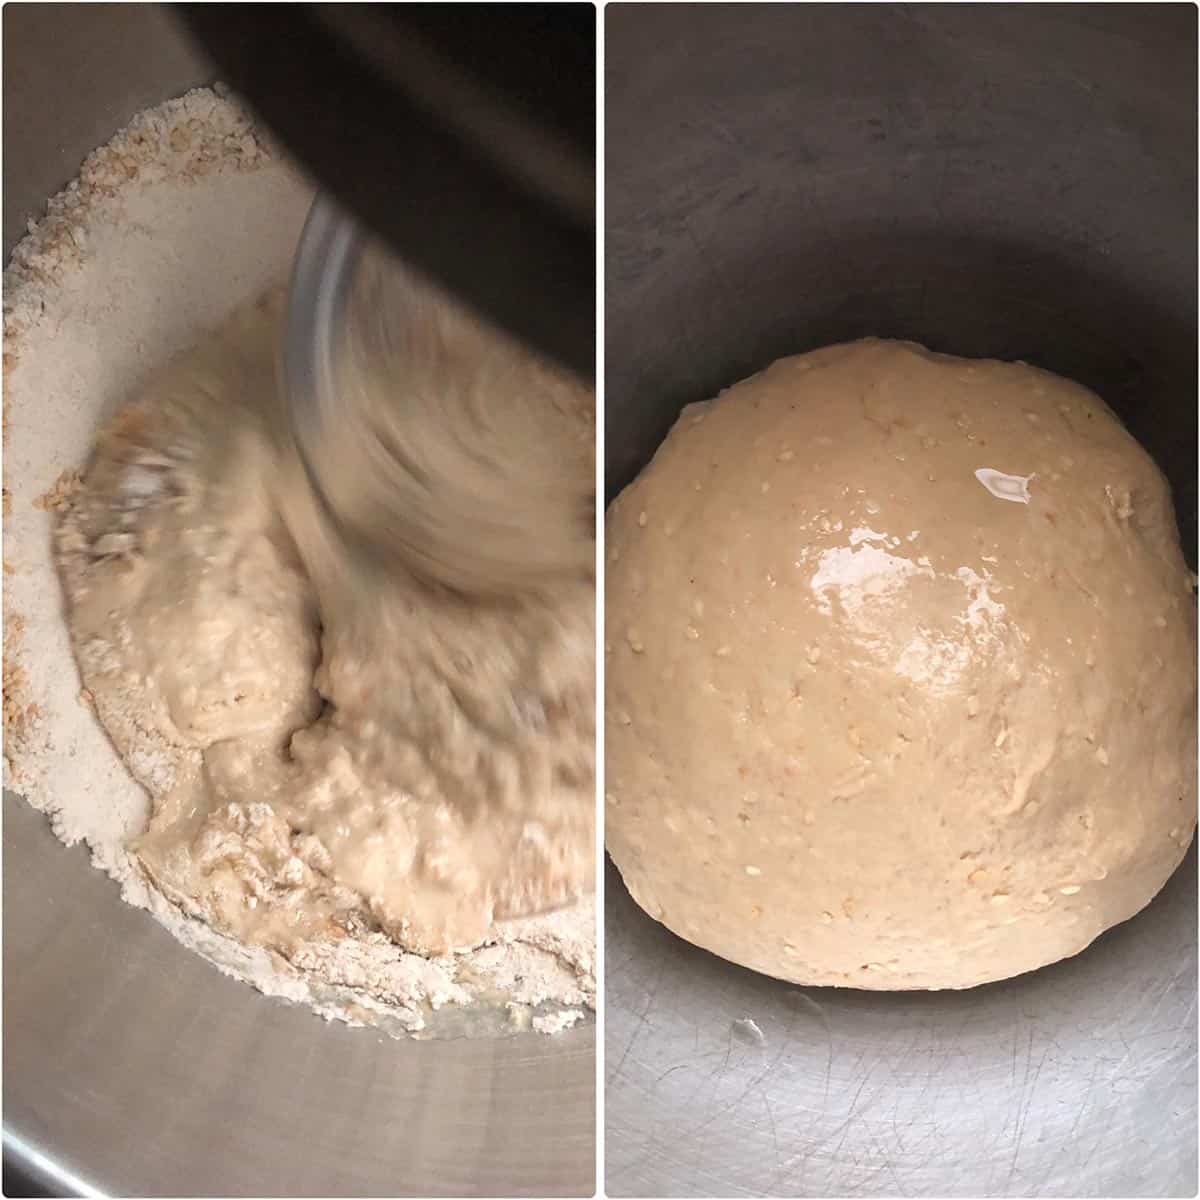 Mixing and kneading to form a soft dough